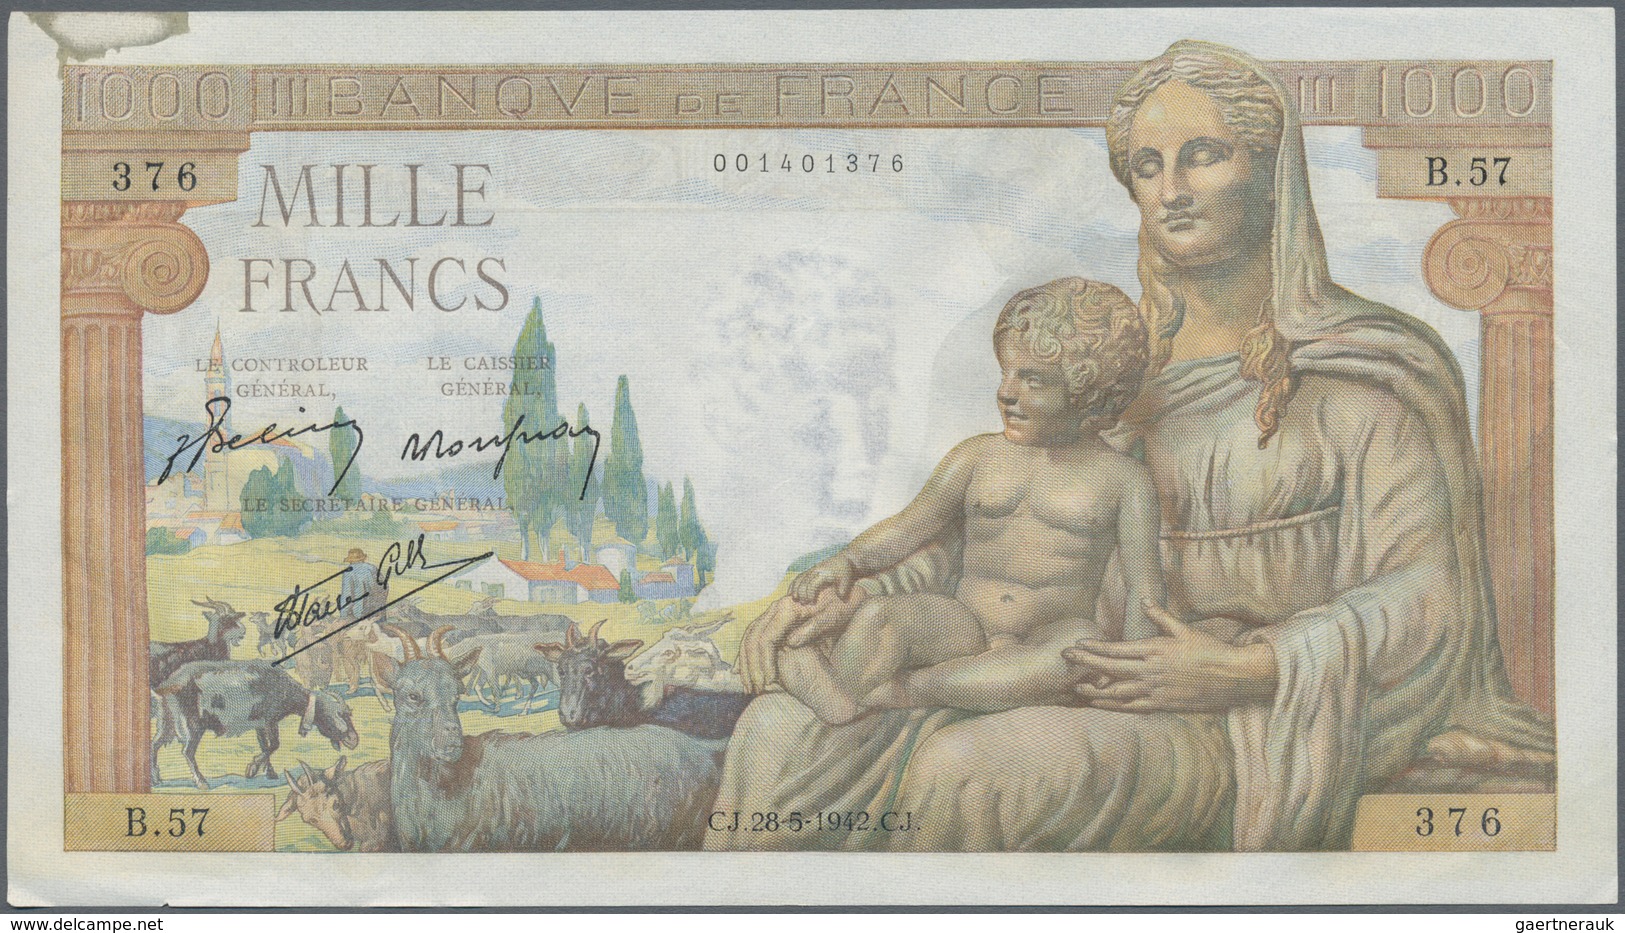 France / Frankreich: set of 14 notes containing CONSECUTIVE sets of 1000 Francs "Demeter" 1943 P. 10